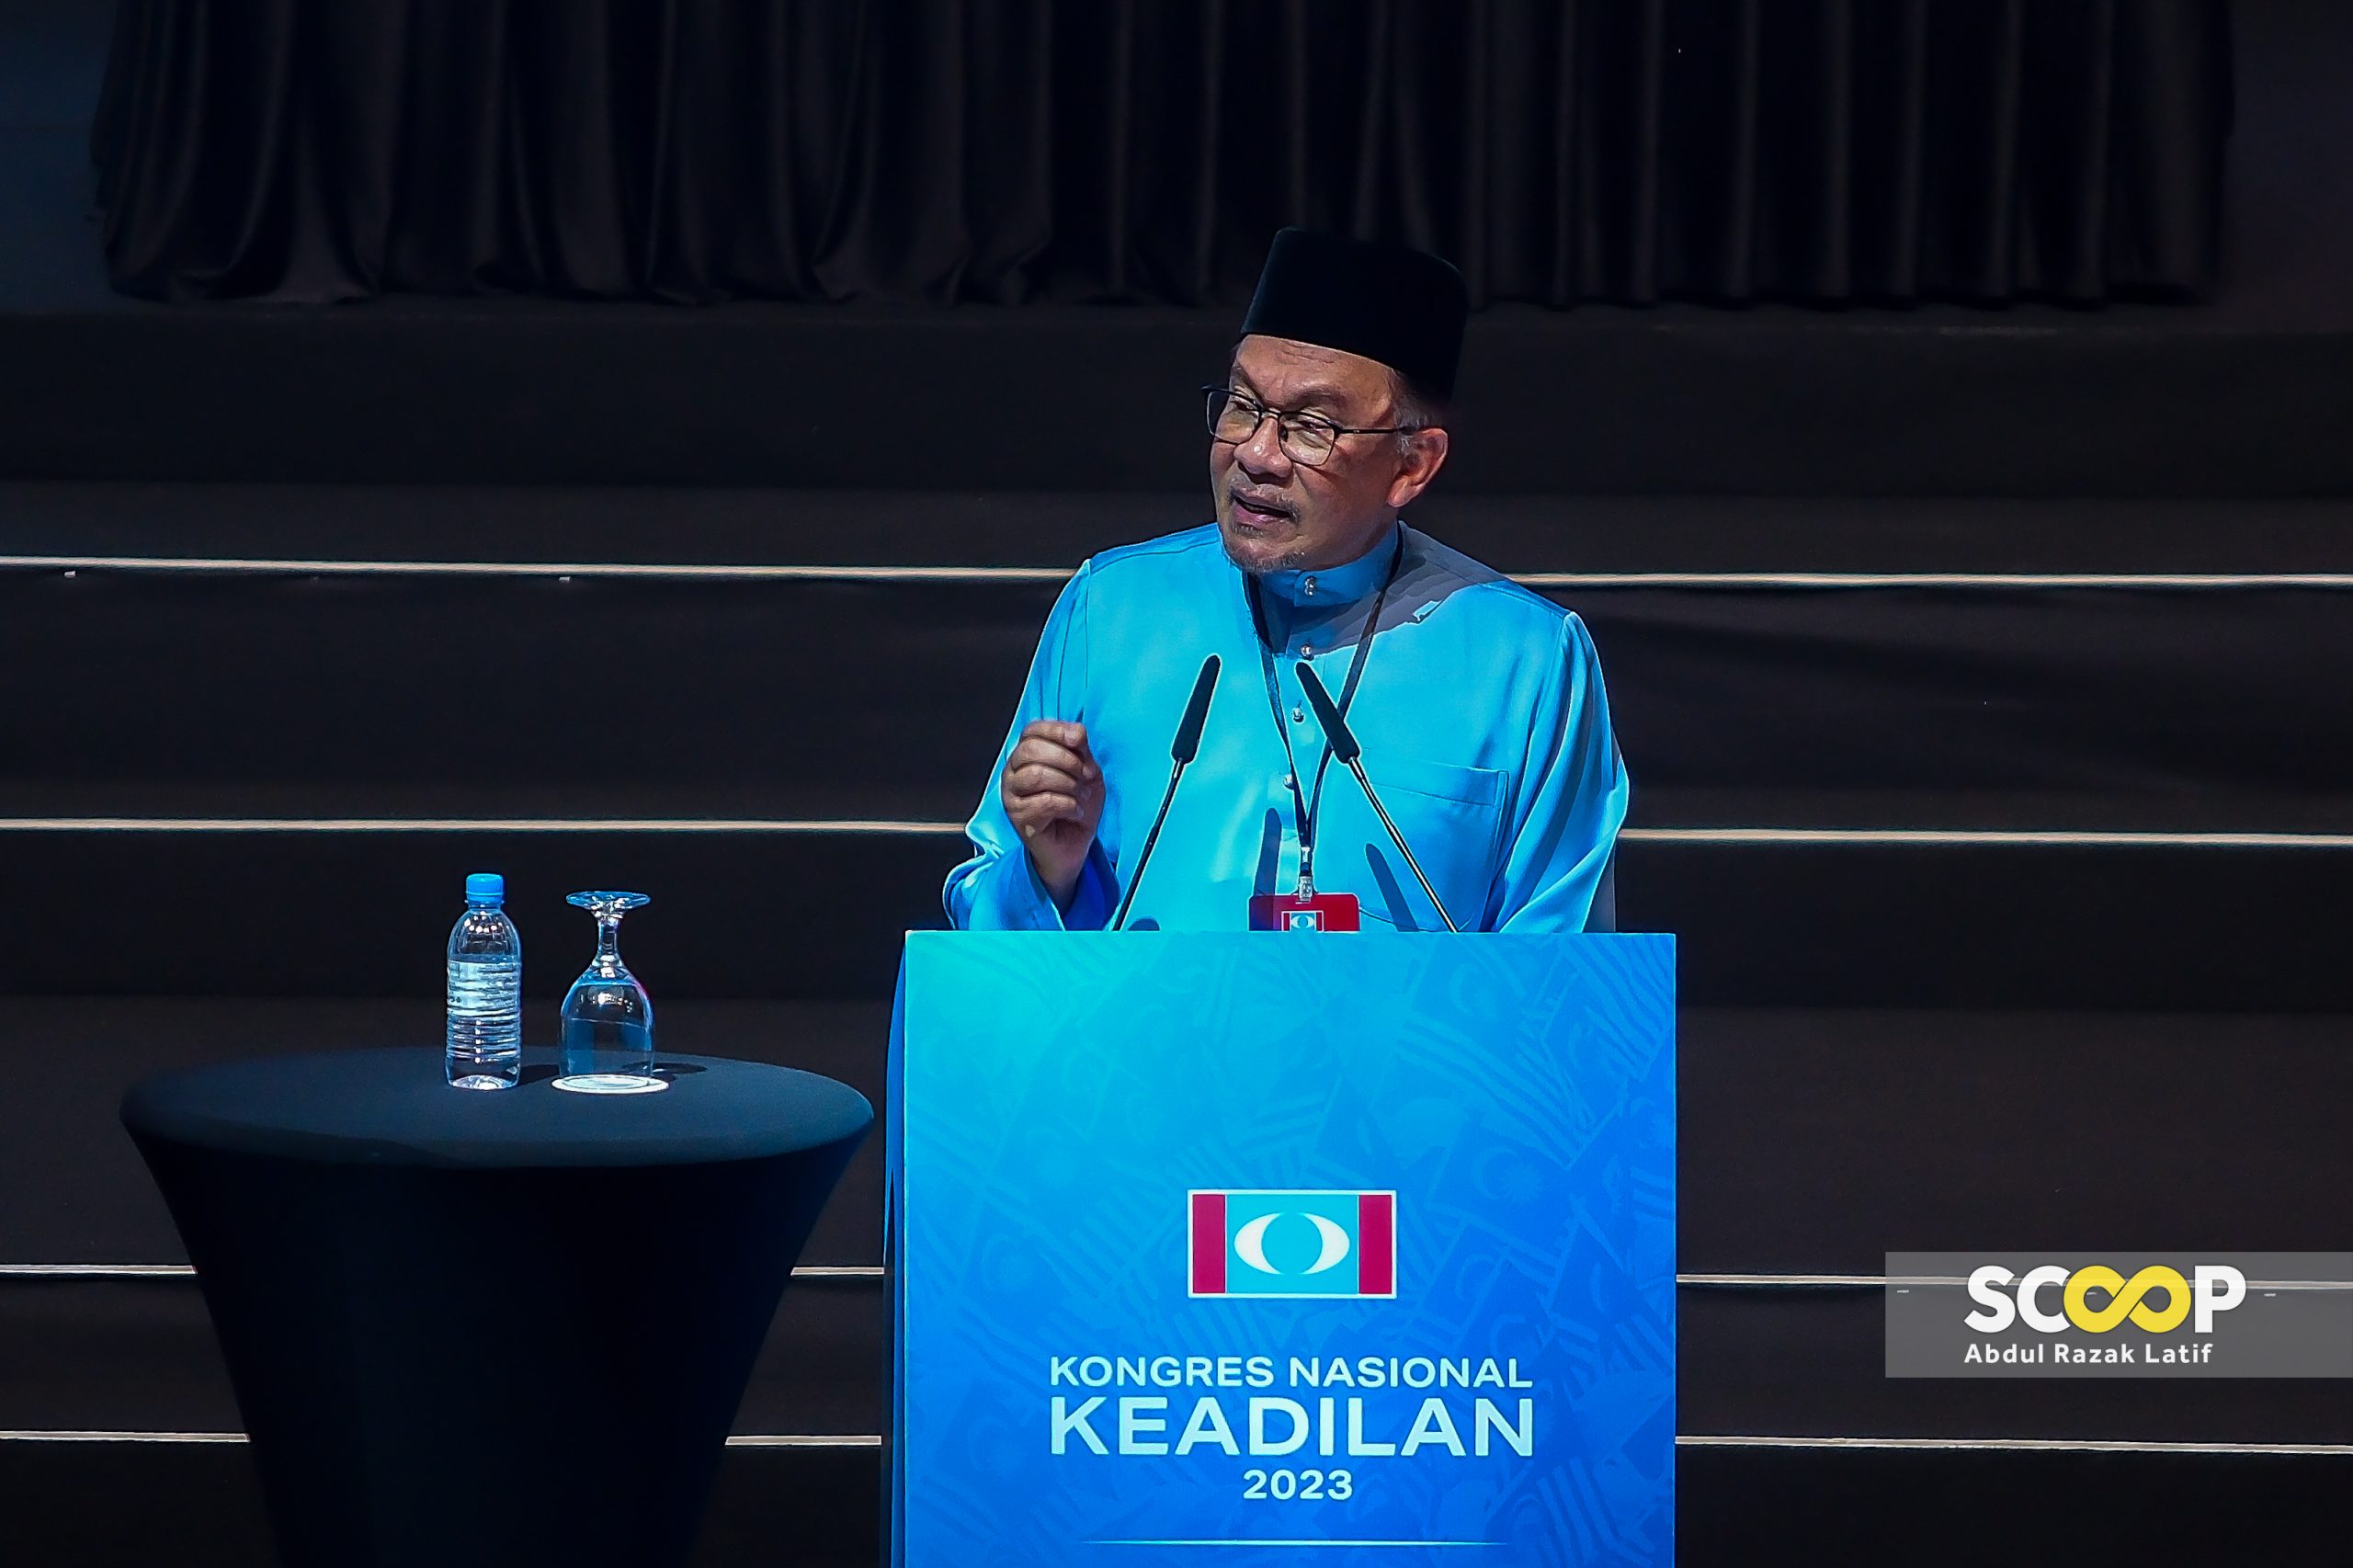 Increased Rahmah aid if subsidy rationalisation affects M’sians: Anwar